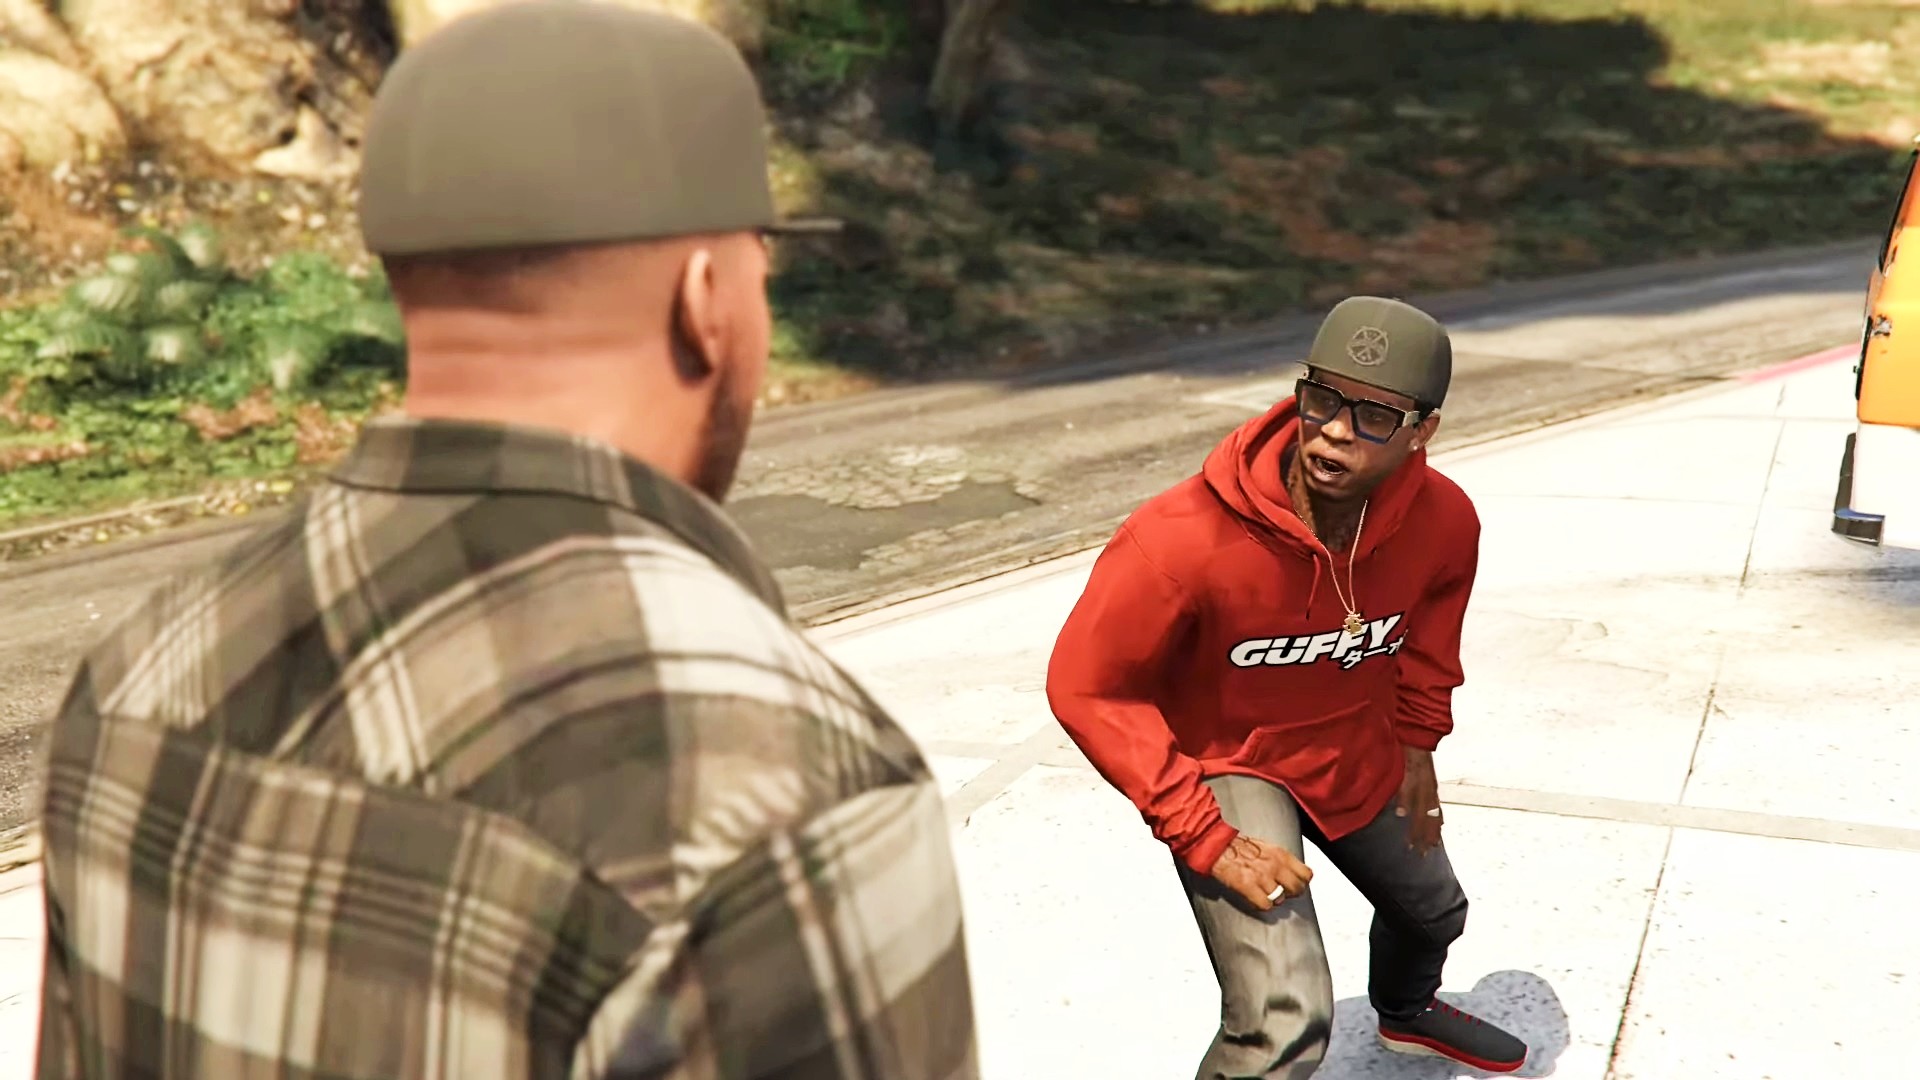 Lamar roasts Franklin again in GTA Online’s The Contract update